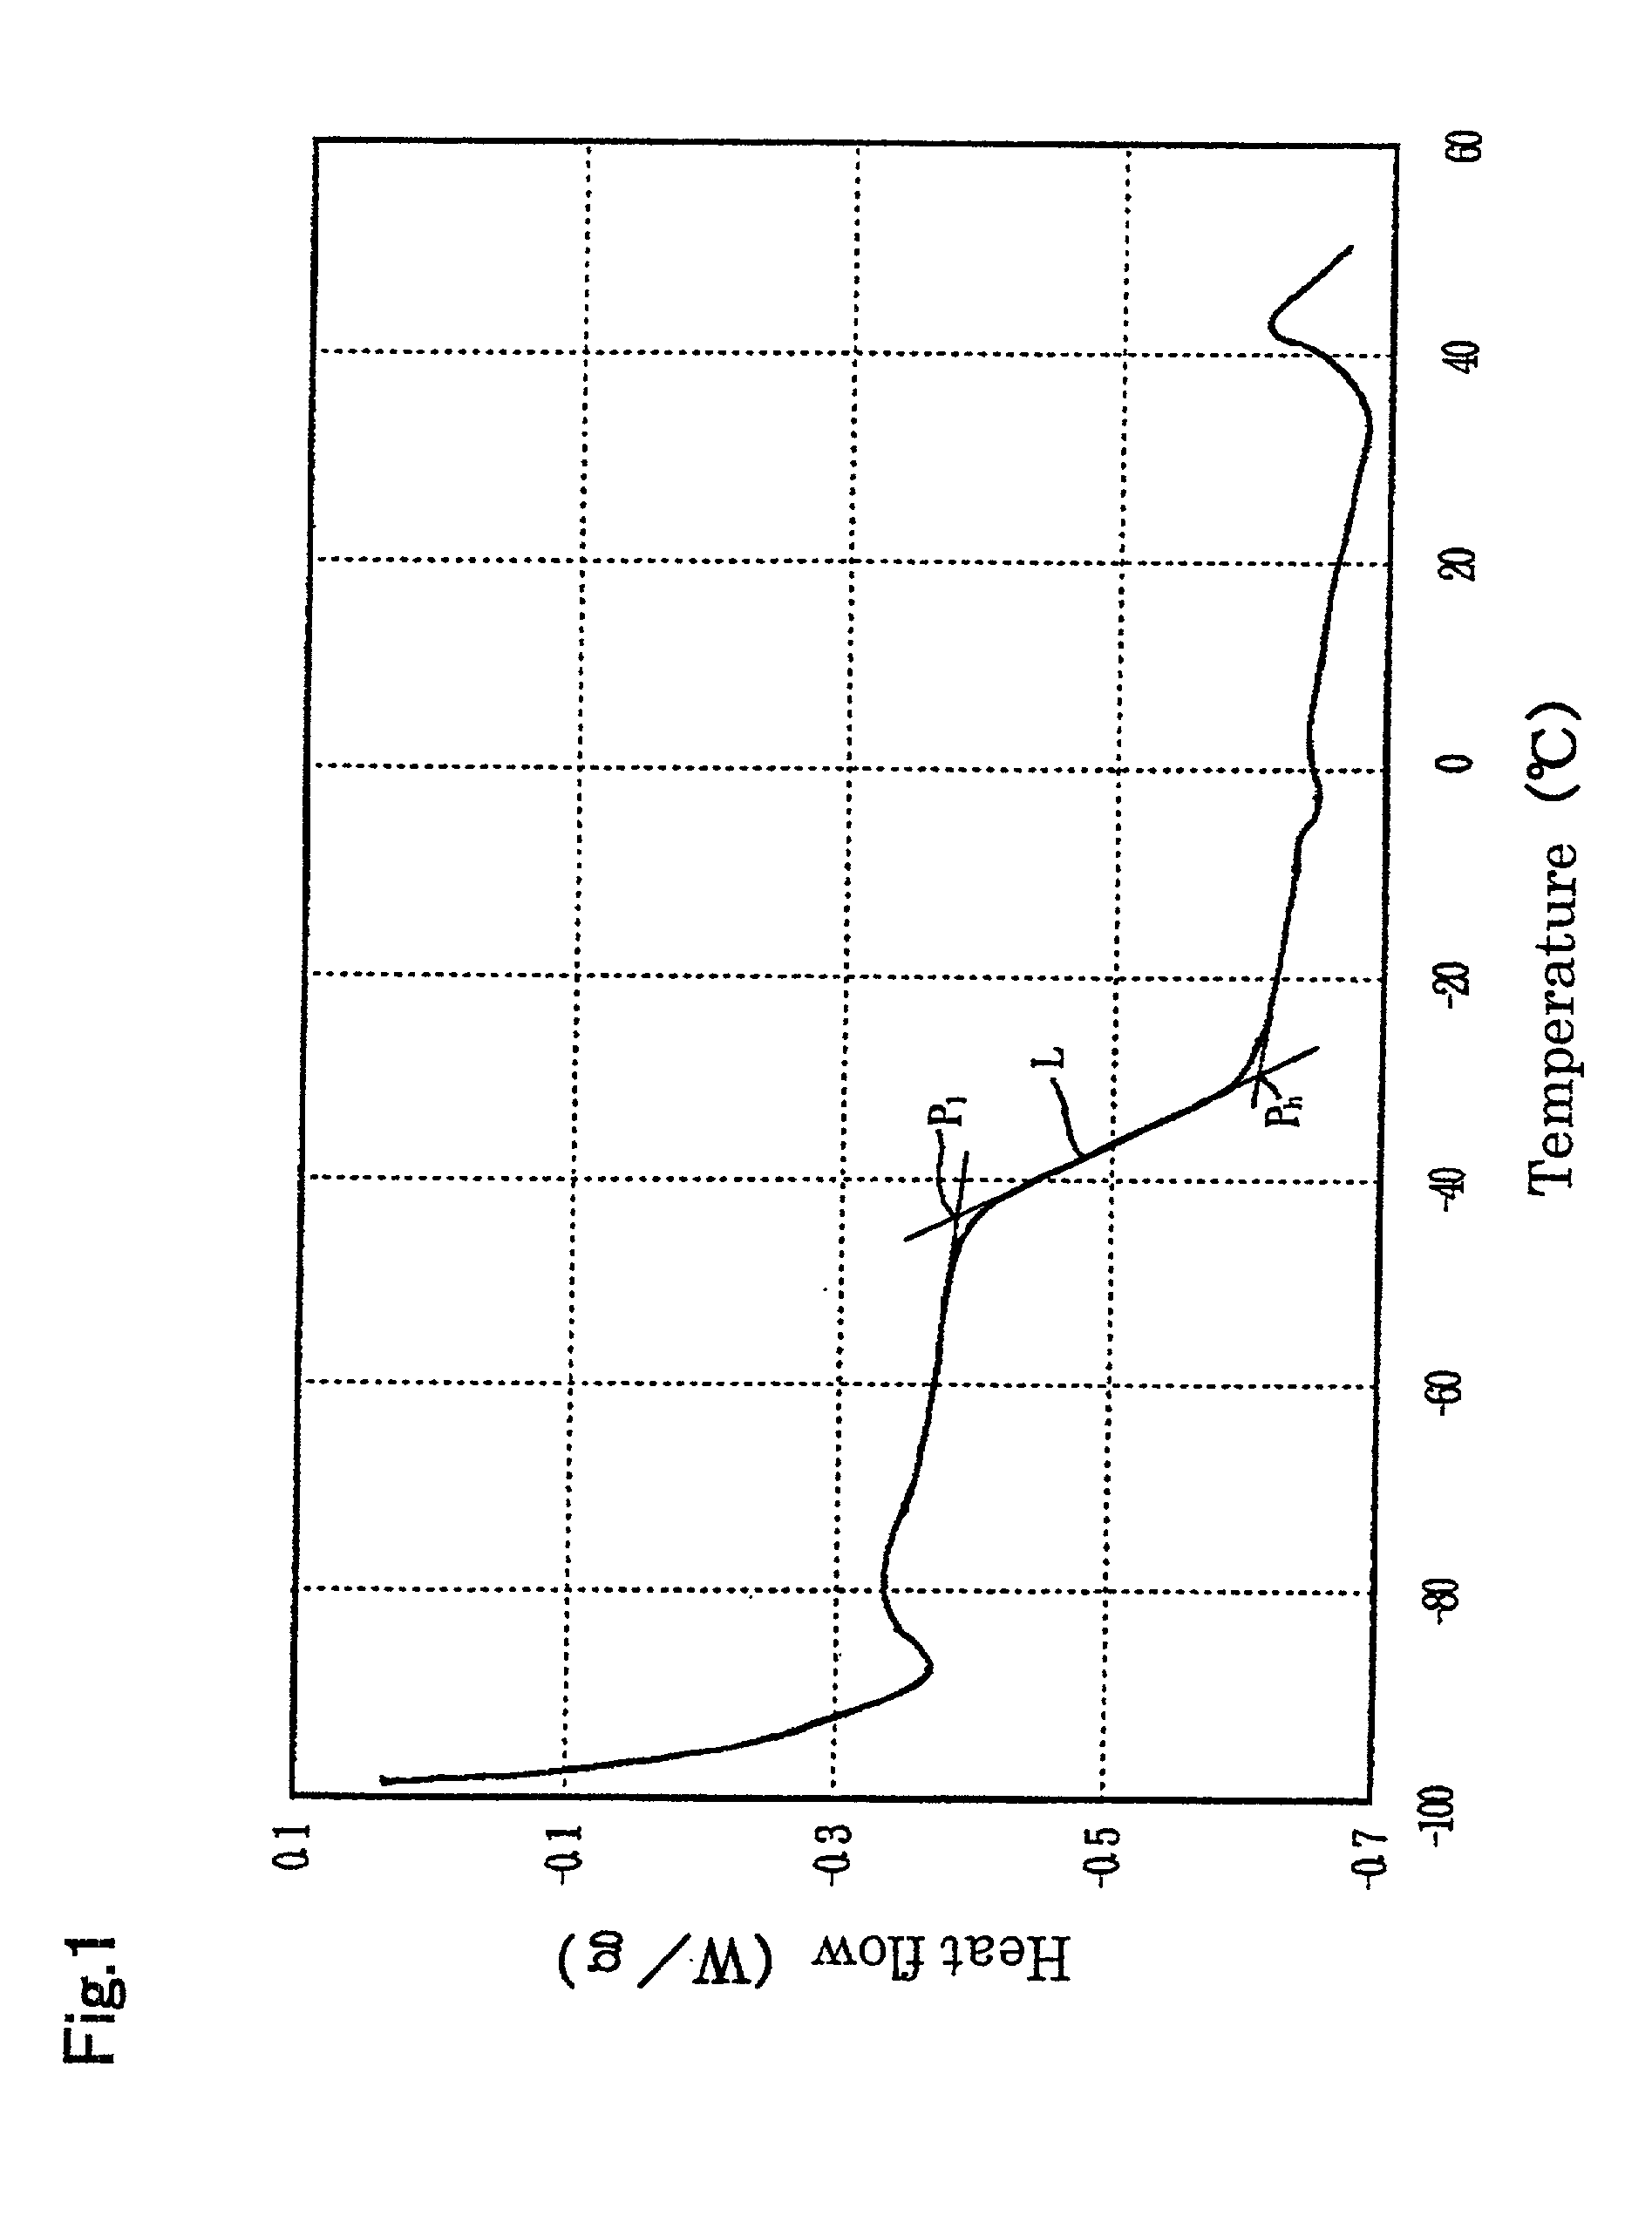 Conjugated diene-based rubber and method of producing the same, oil extended rubber and rubber composition containing the same